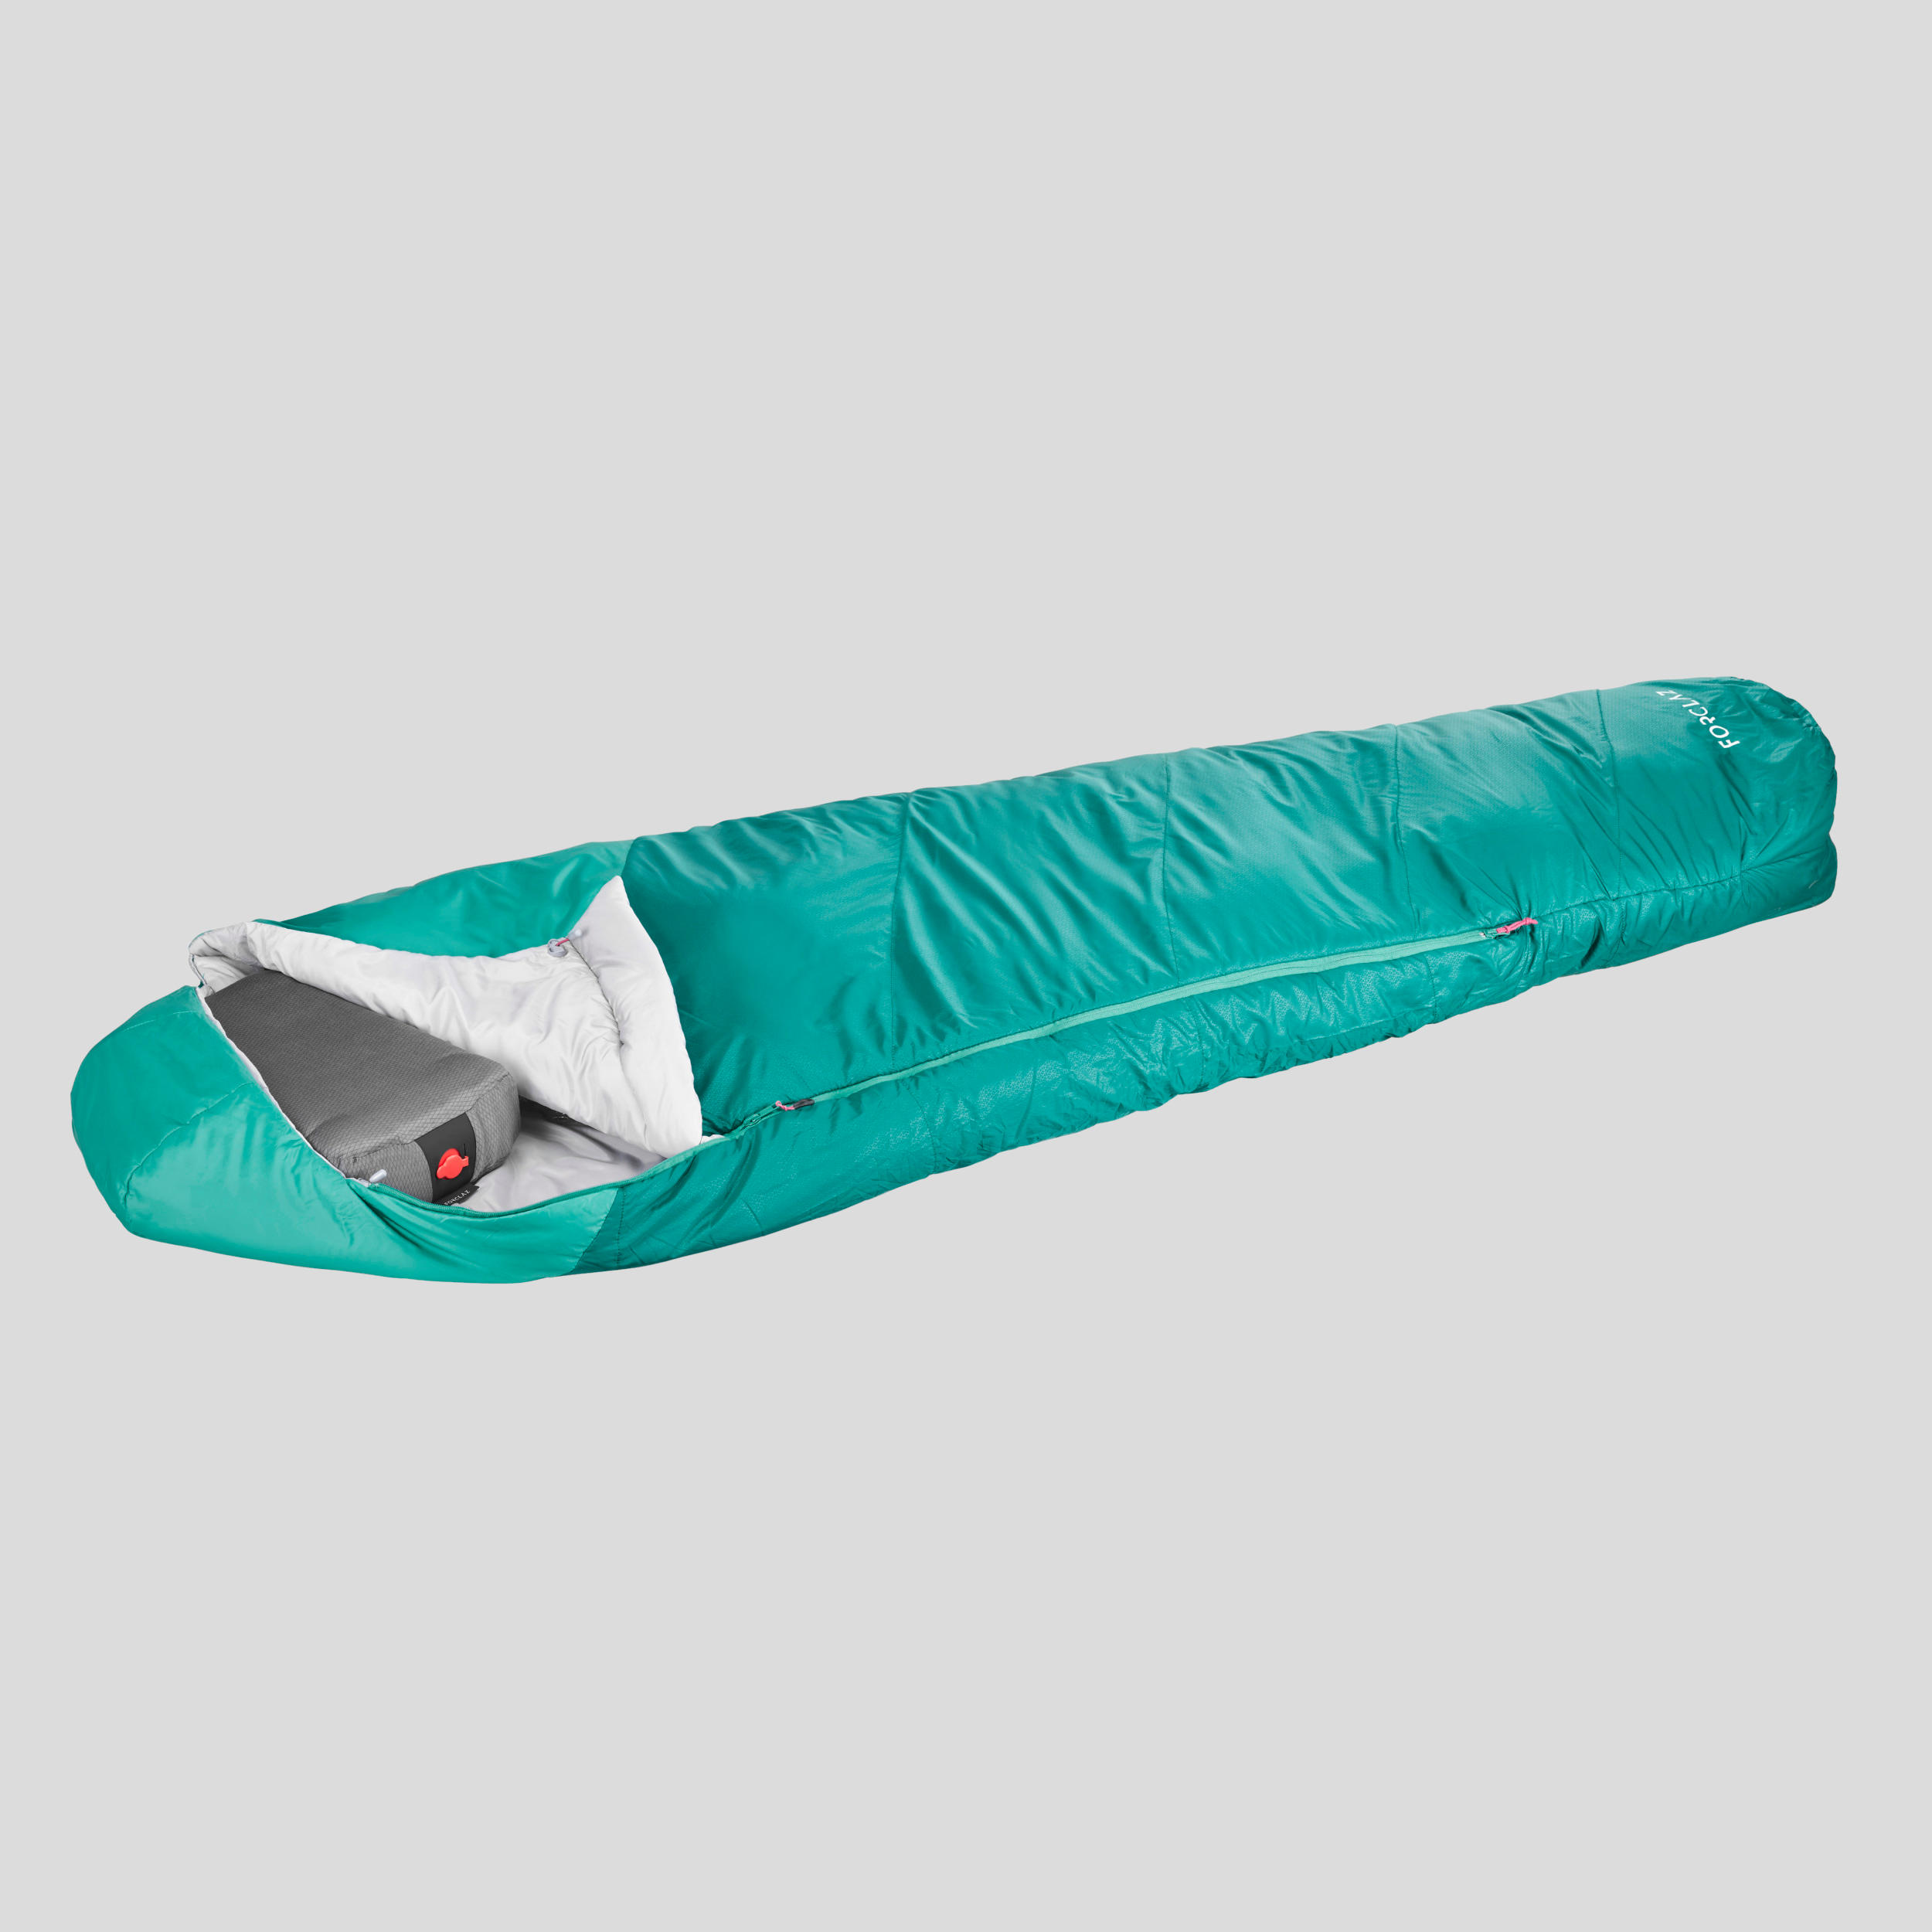 Inflatable Camping Pillow - MT 500 Granite - FORCLAZ